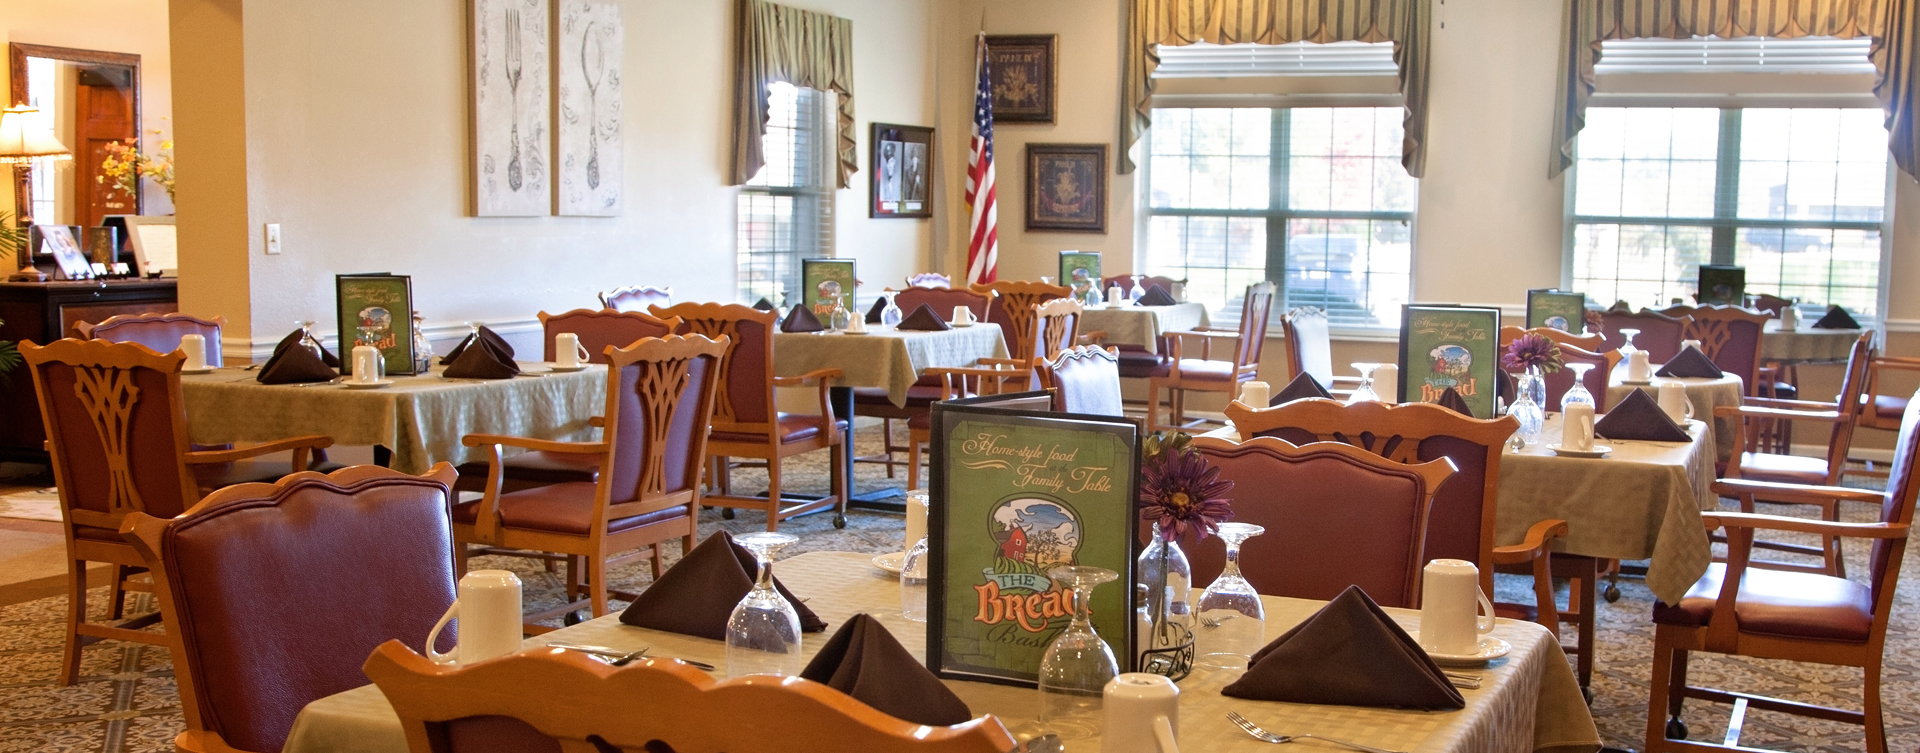 Enjoy homestyle food with made-from-scratch recipes in our dining room at Bickford of Marion